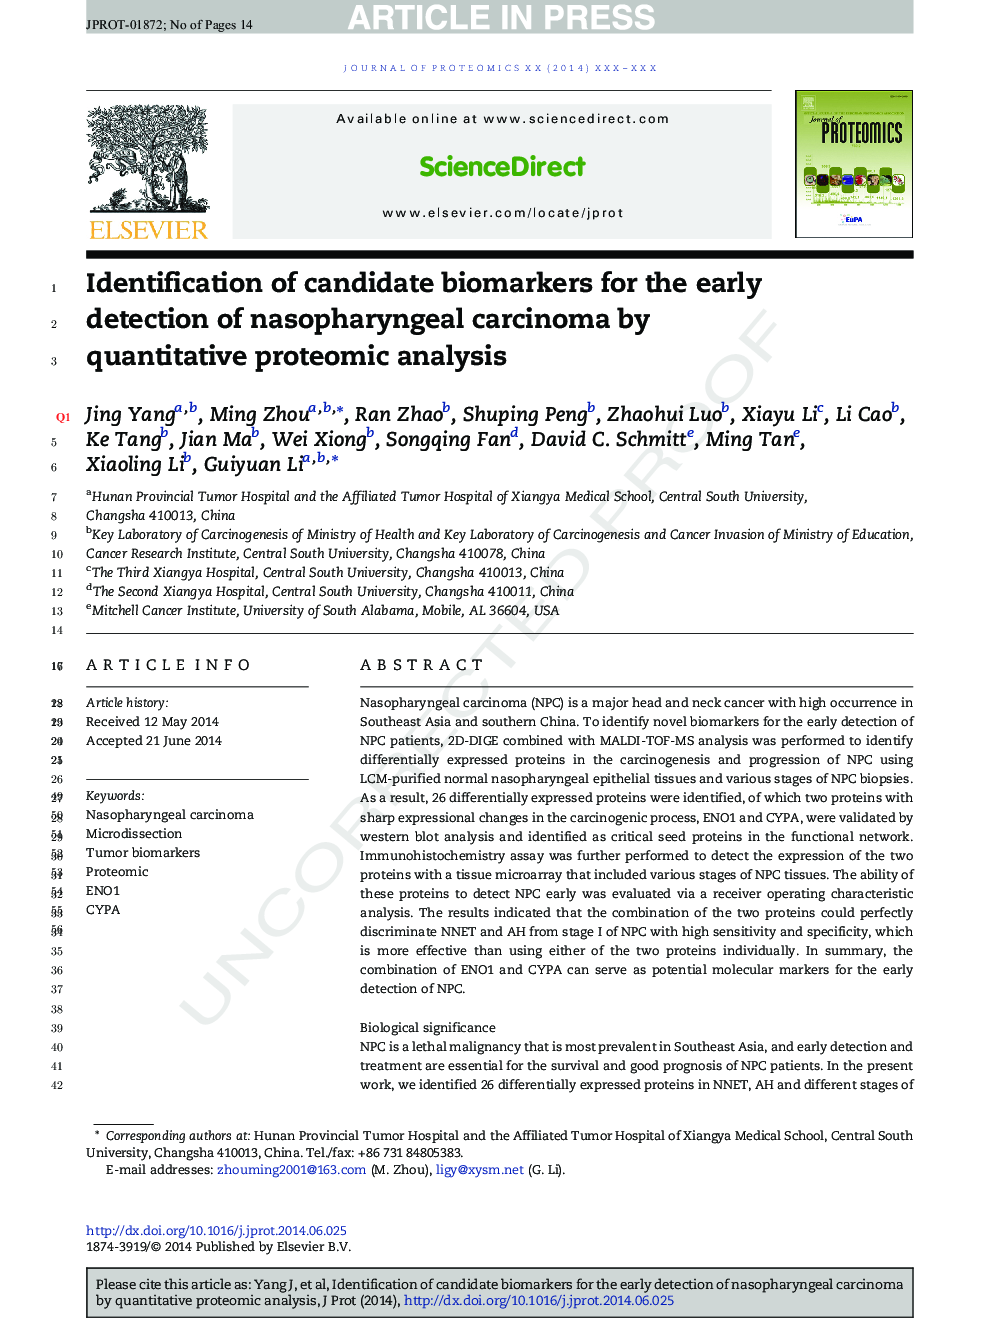 Identification of candidate biomarkers for the early detection of nasopharyngeal carcinoma by quantitative proteomic analysis